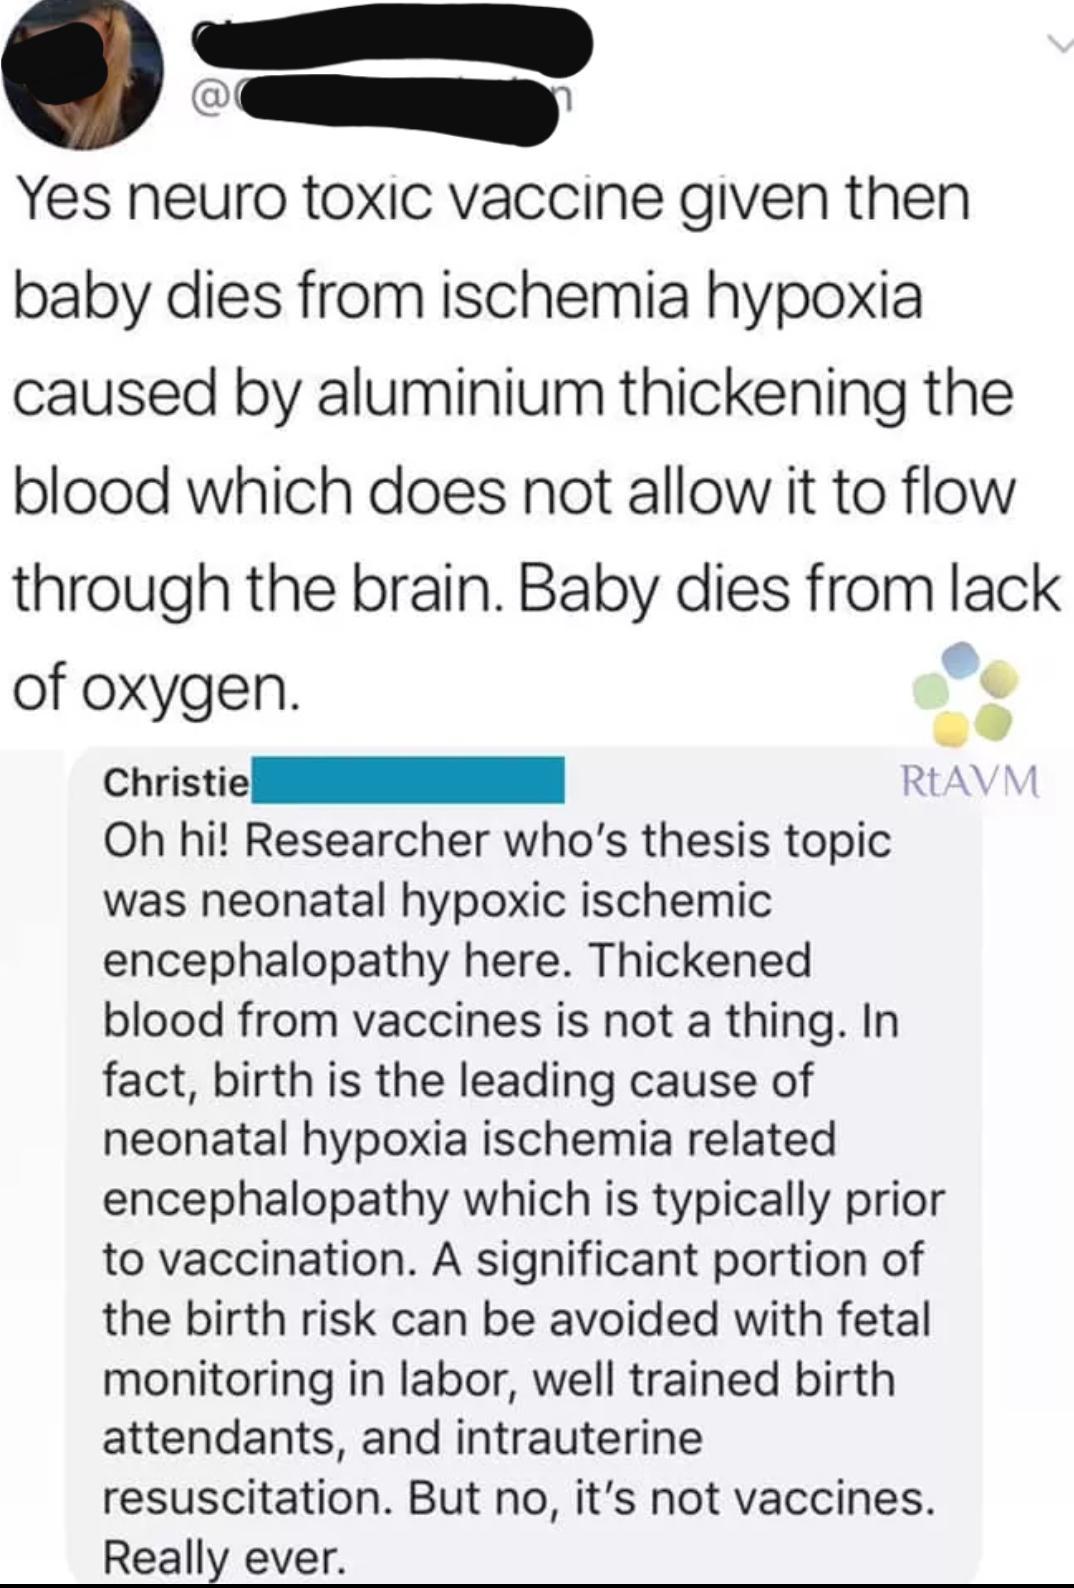 Yes neuro toxic vaccine given then baby dies from ischemia hypoxia caused by aluminium thickening the blood which does not allow it to flow through the brain. Baby dies from lack of oxygen.Oh hi! Researcher who's thesis topic was neonatal…